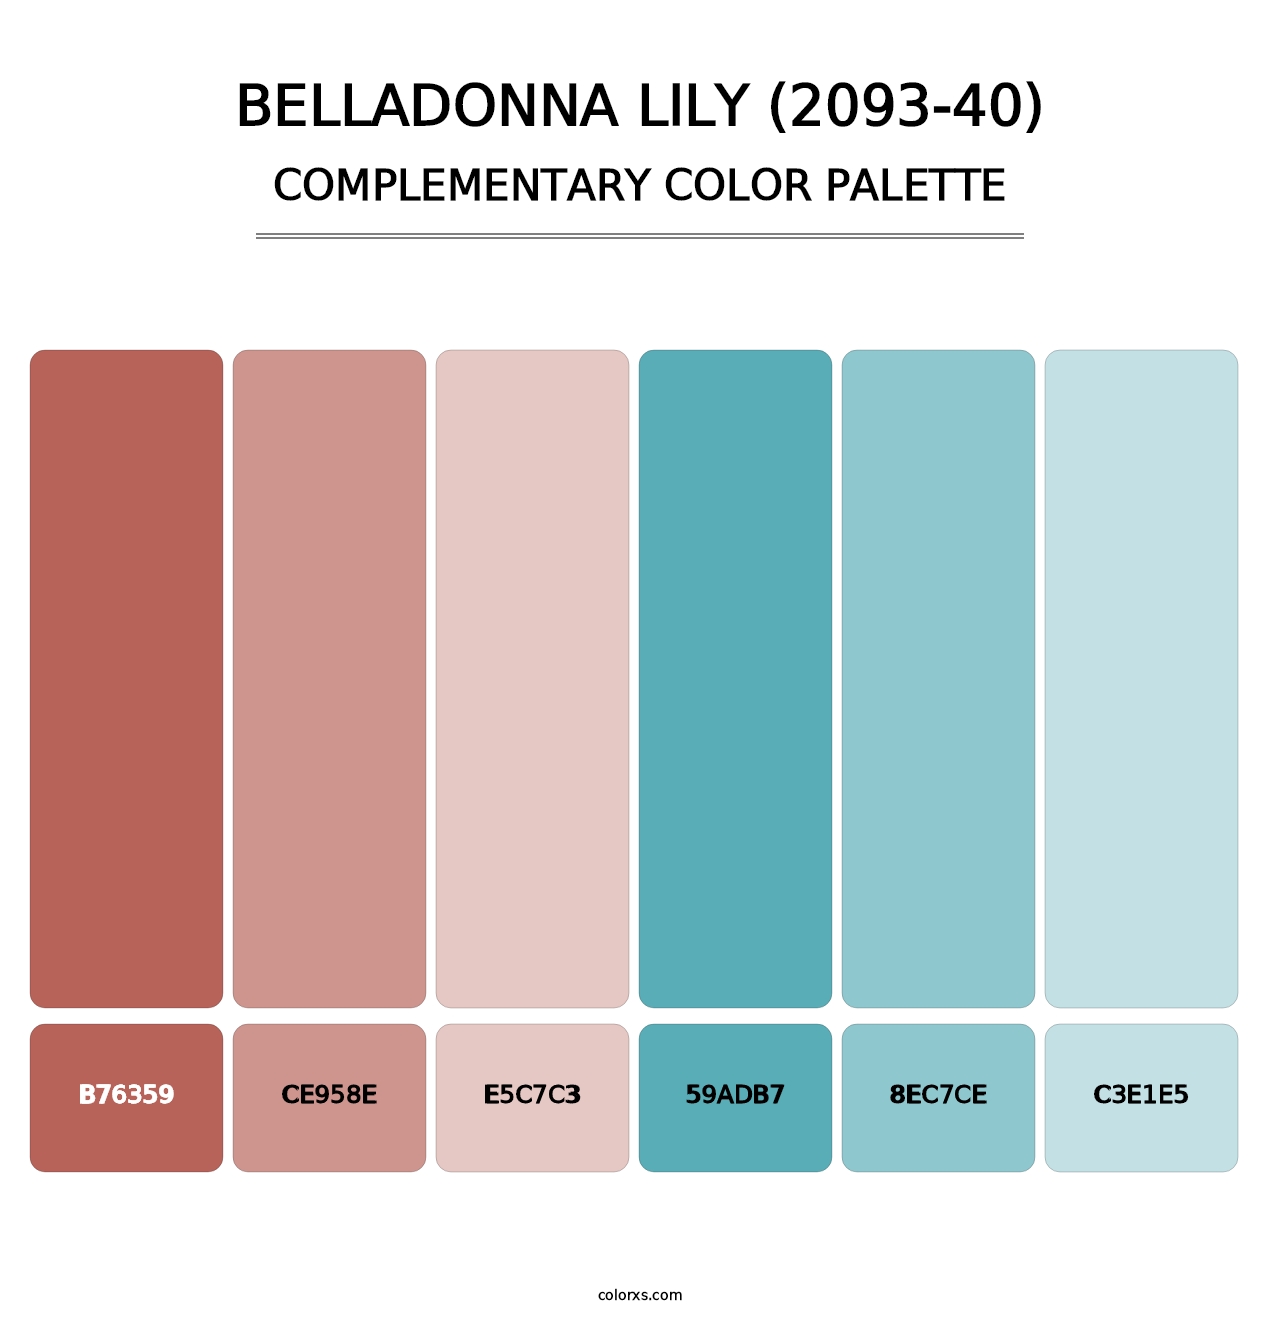 Belladonna Lily (2093-40) - Complementary Color Palette